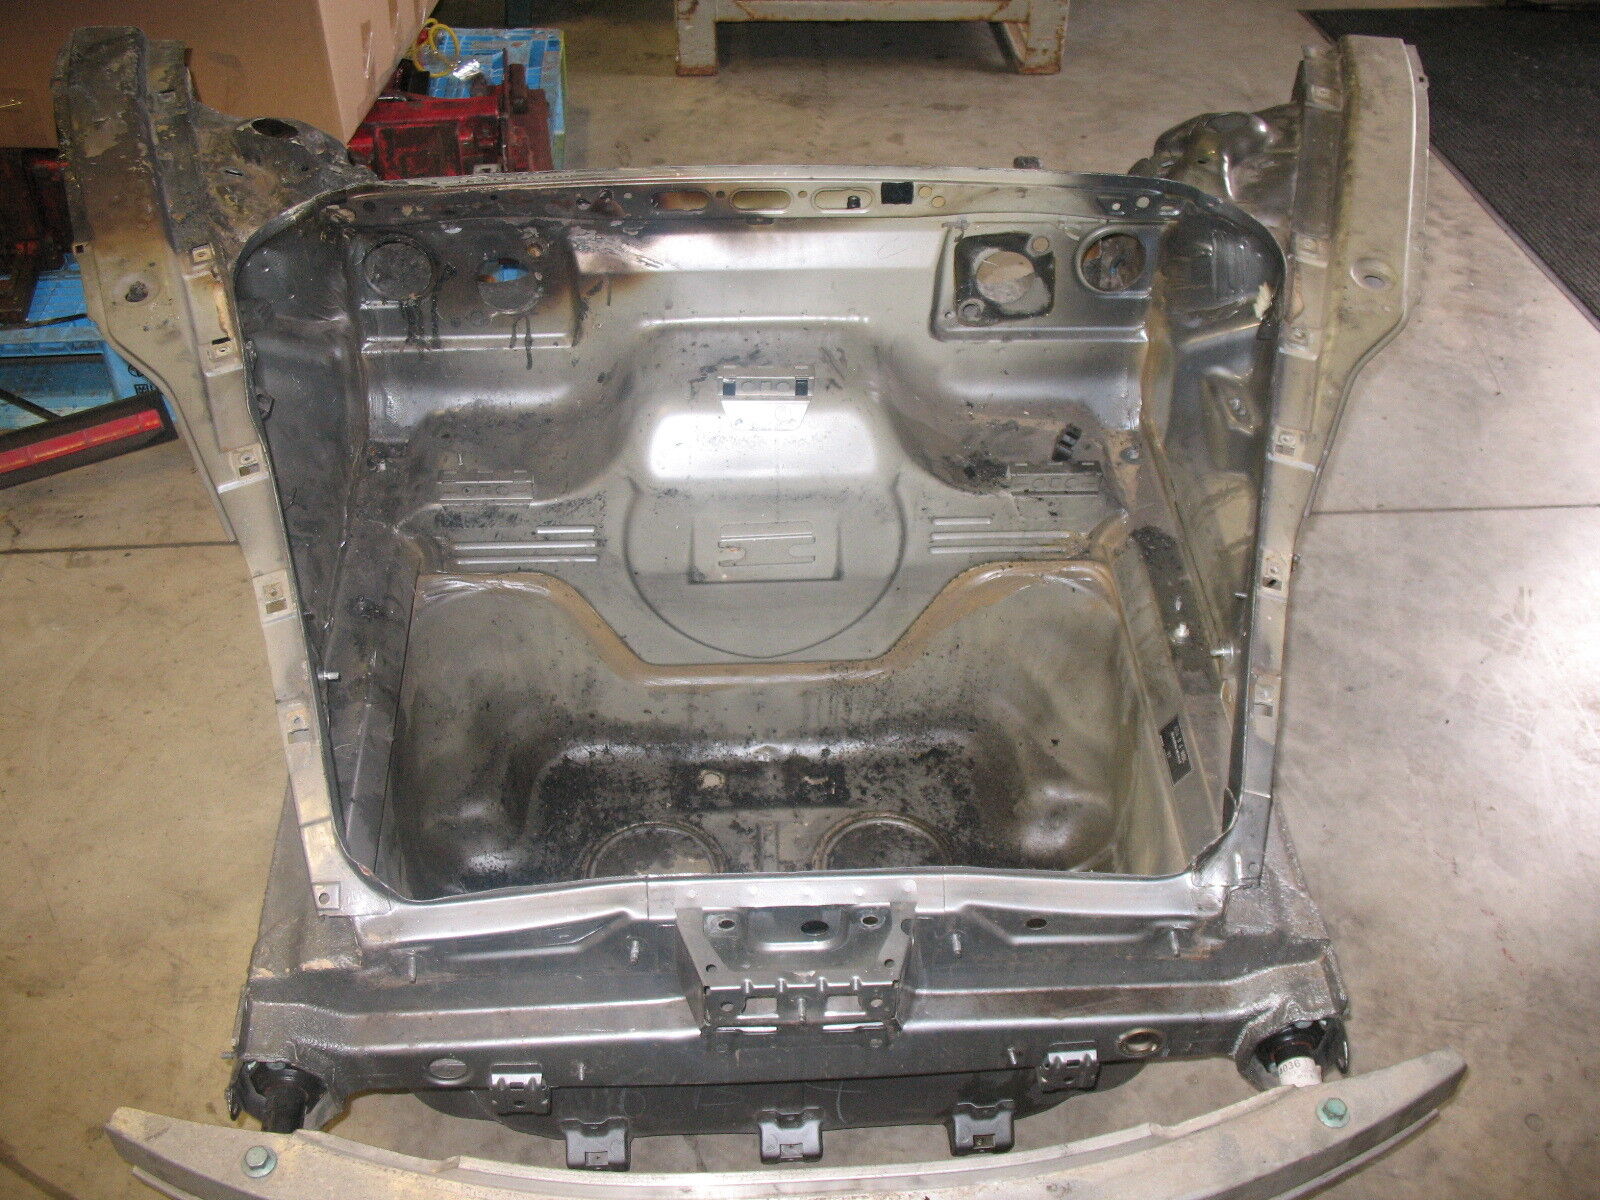 PORSCHE 911 996 CARRERA, GT3, TURBO,GT2 FRONT BODY SECTION USED